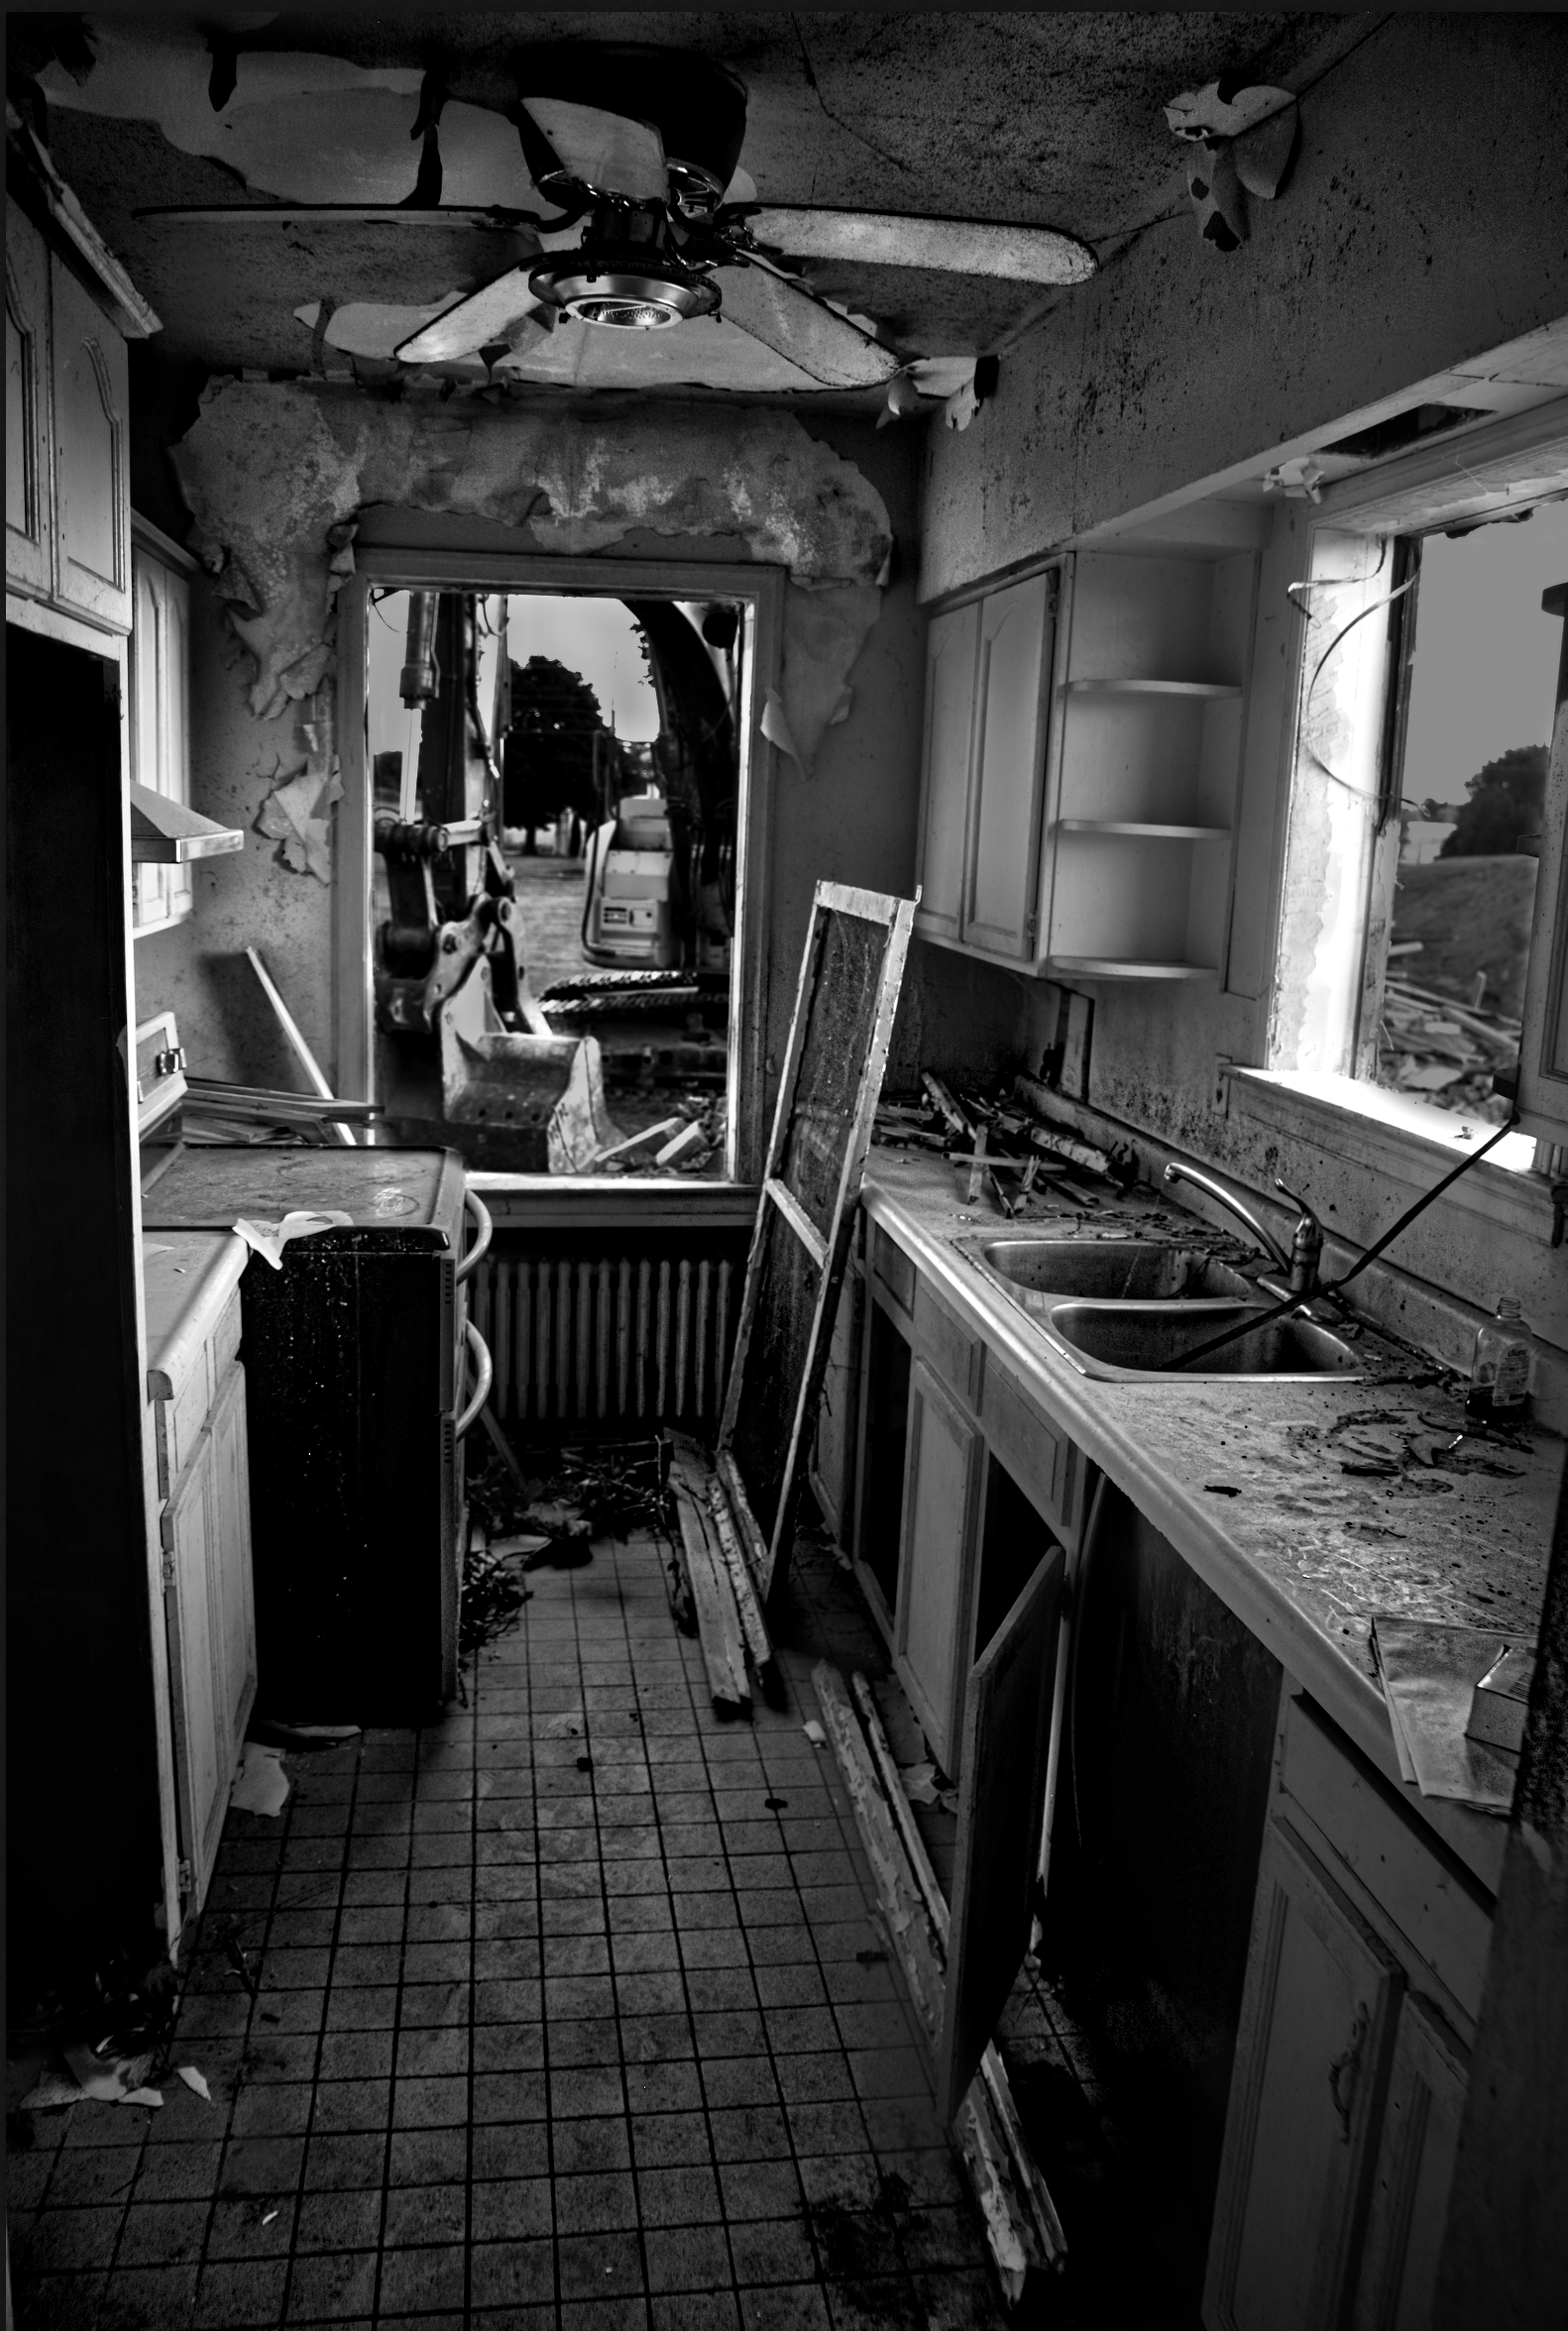 a photograph of a kitchen which is under demolition